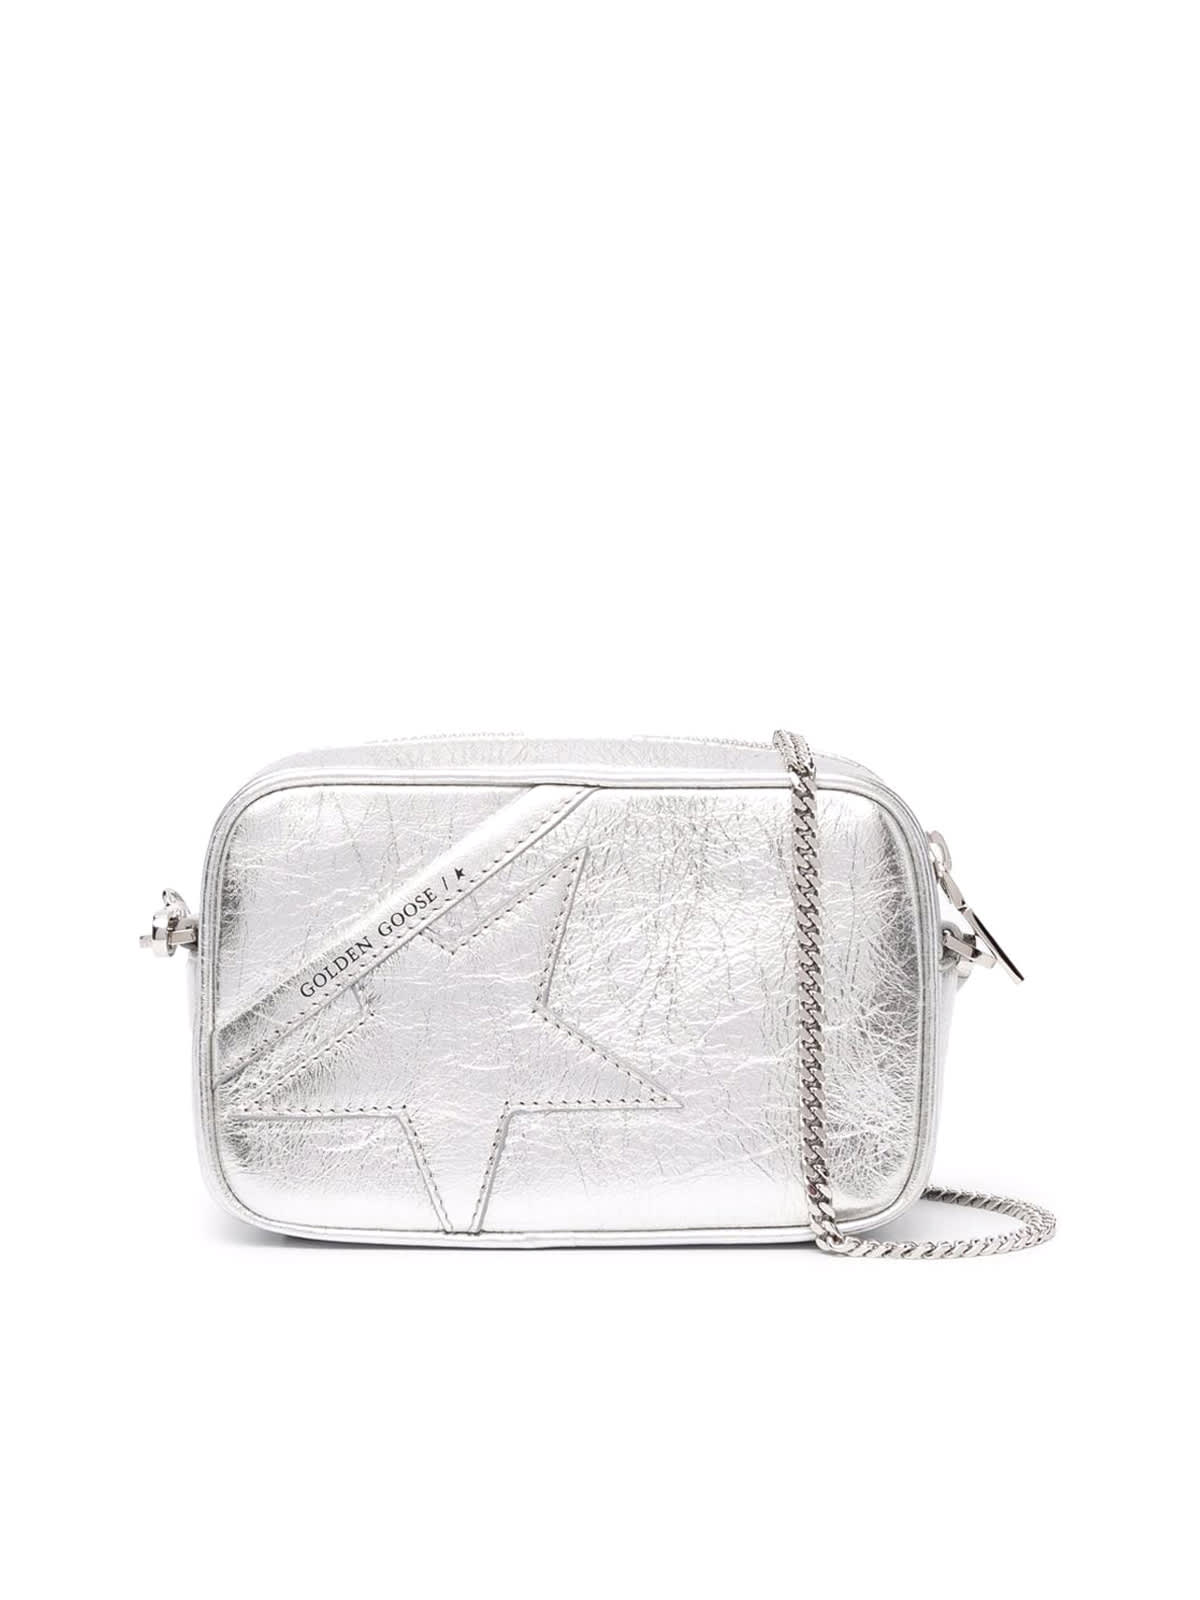 Golden Goose Mini Star Bag Wrinkled Laminated Leather Body And Star